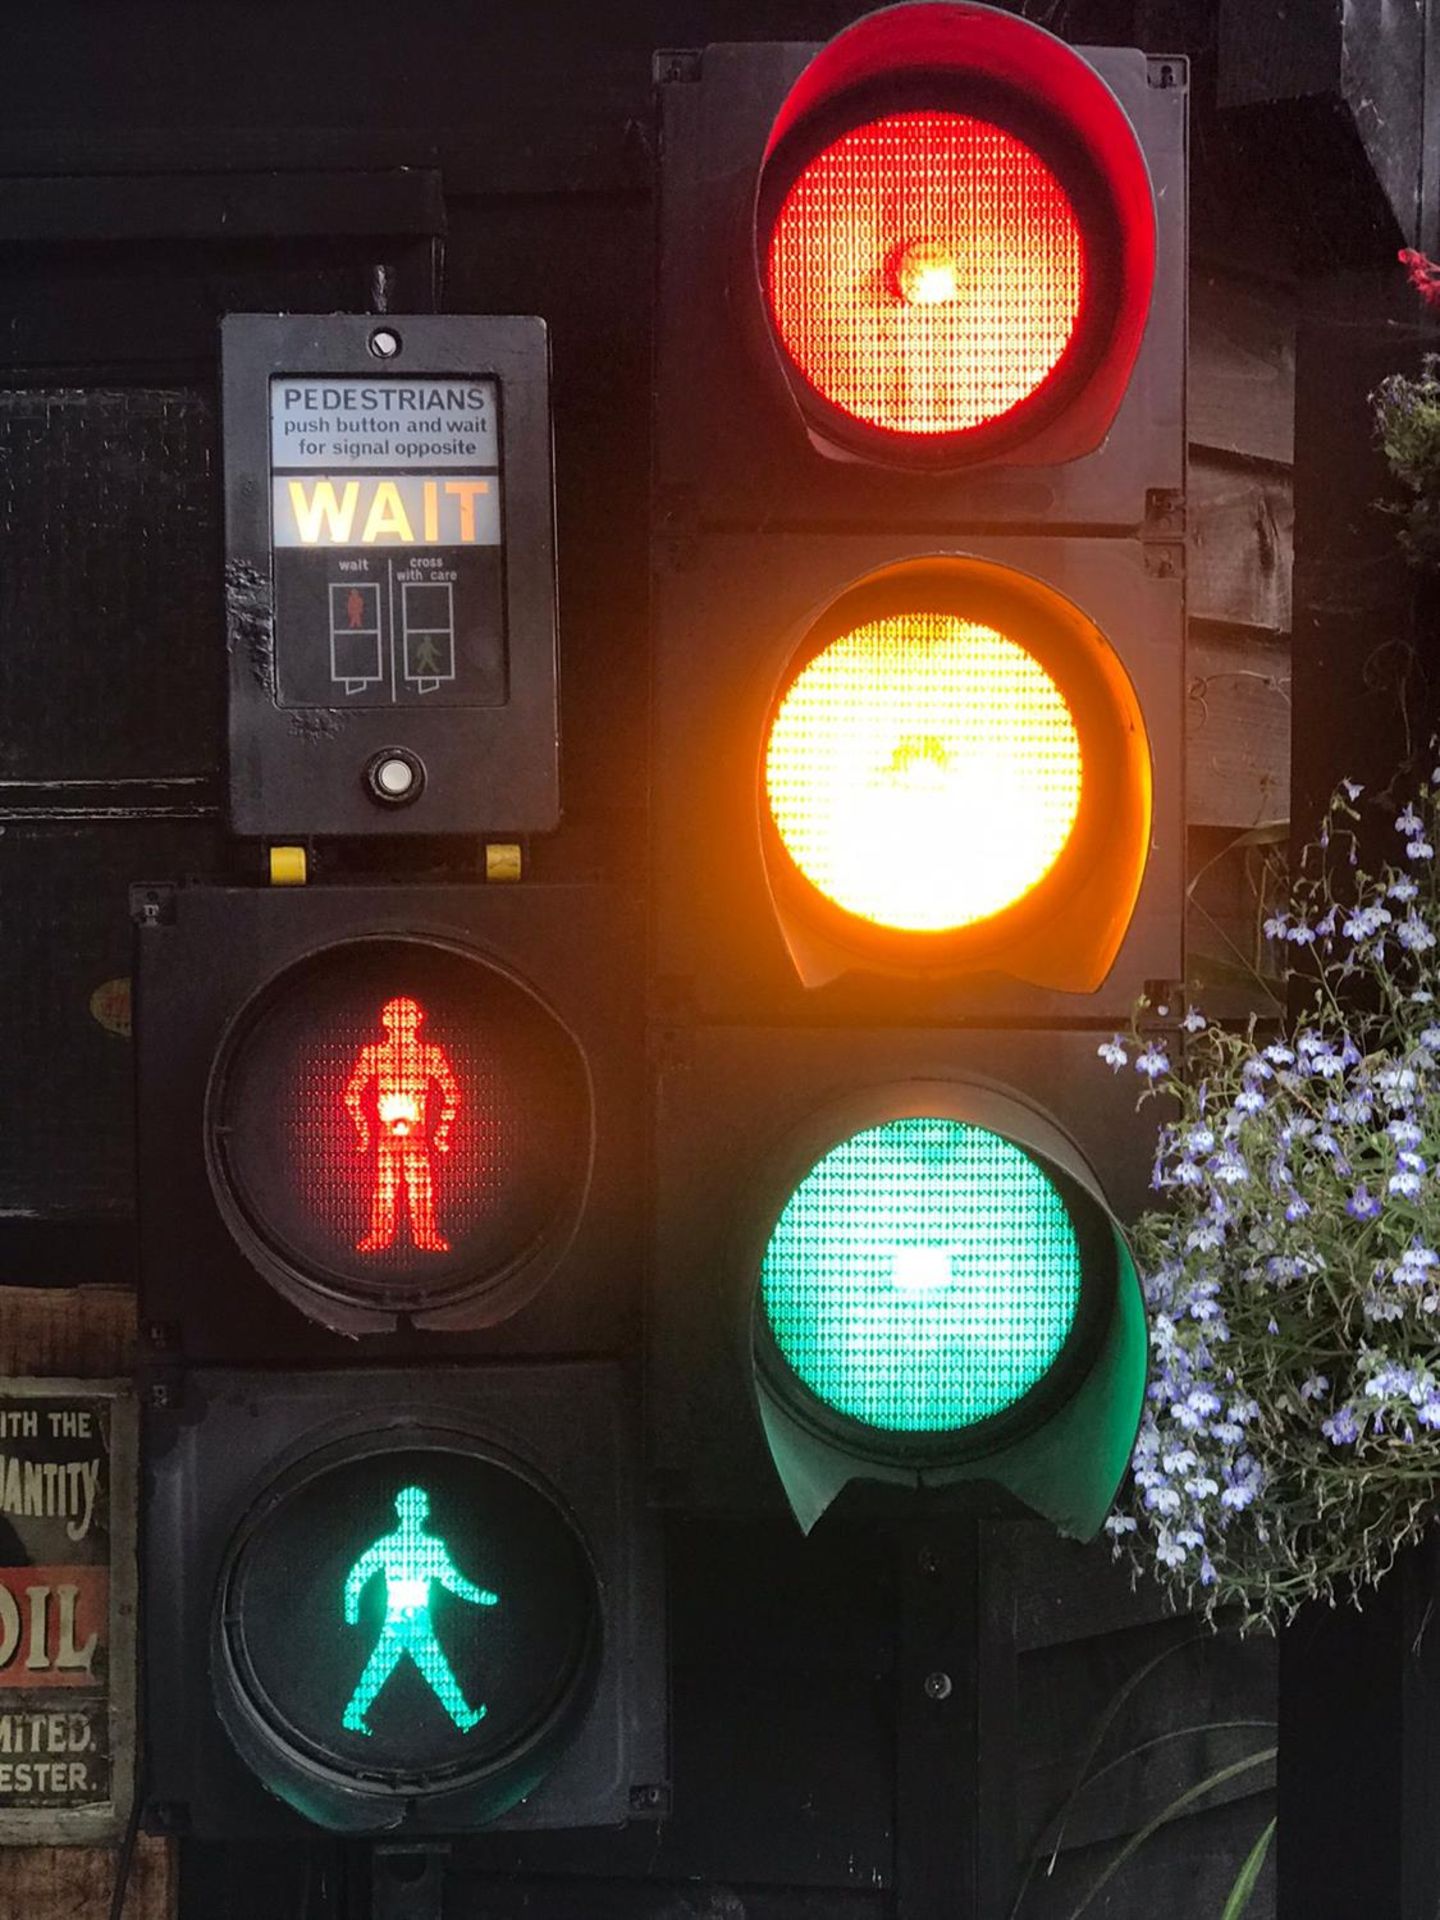 Pelican Crossing and Traffic Lights with Remote Controls